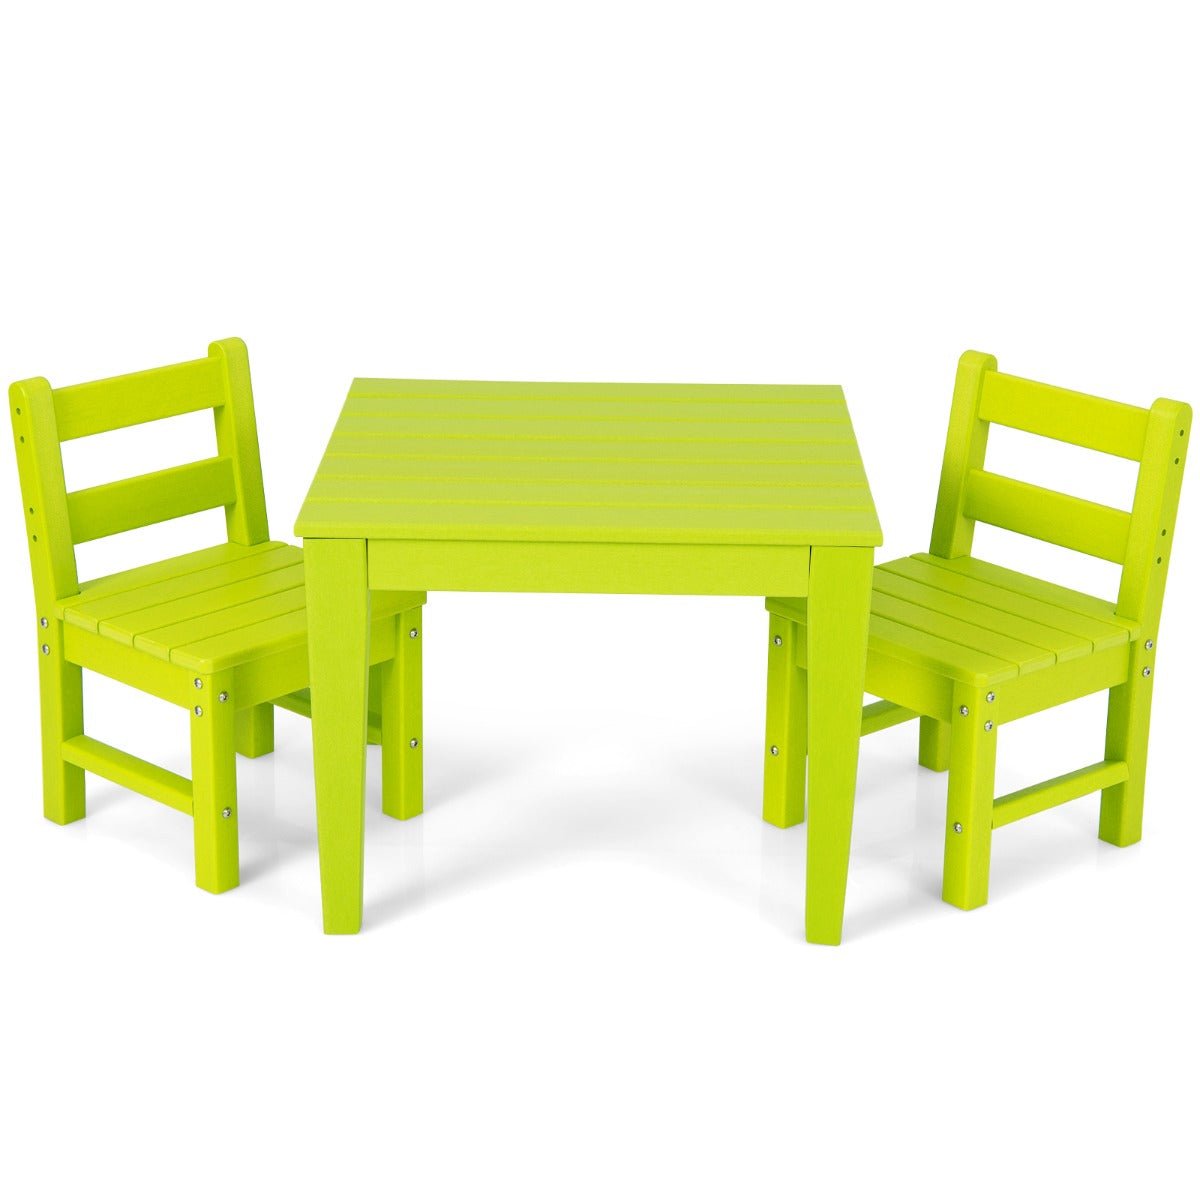 Upgrade Playtime with the Green Kids Table Set